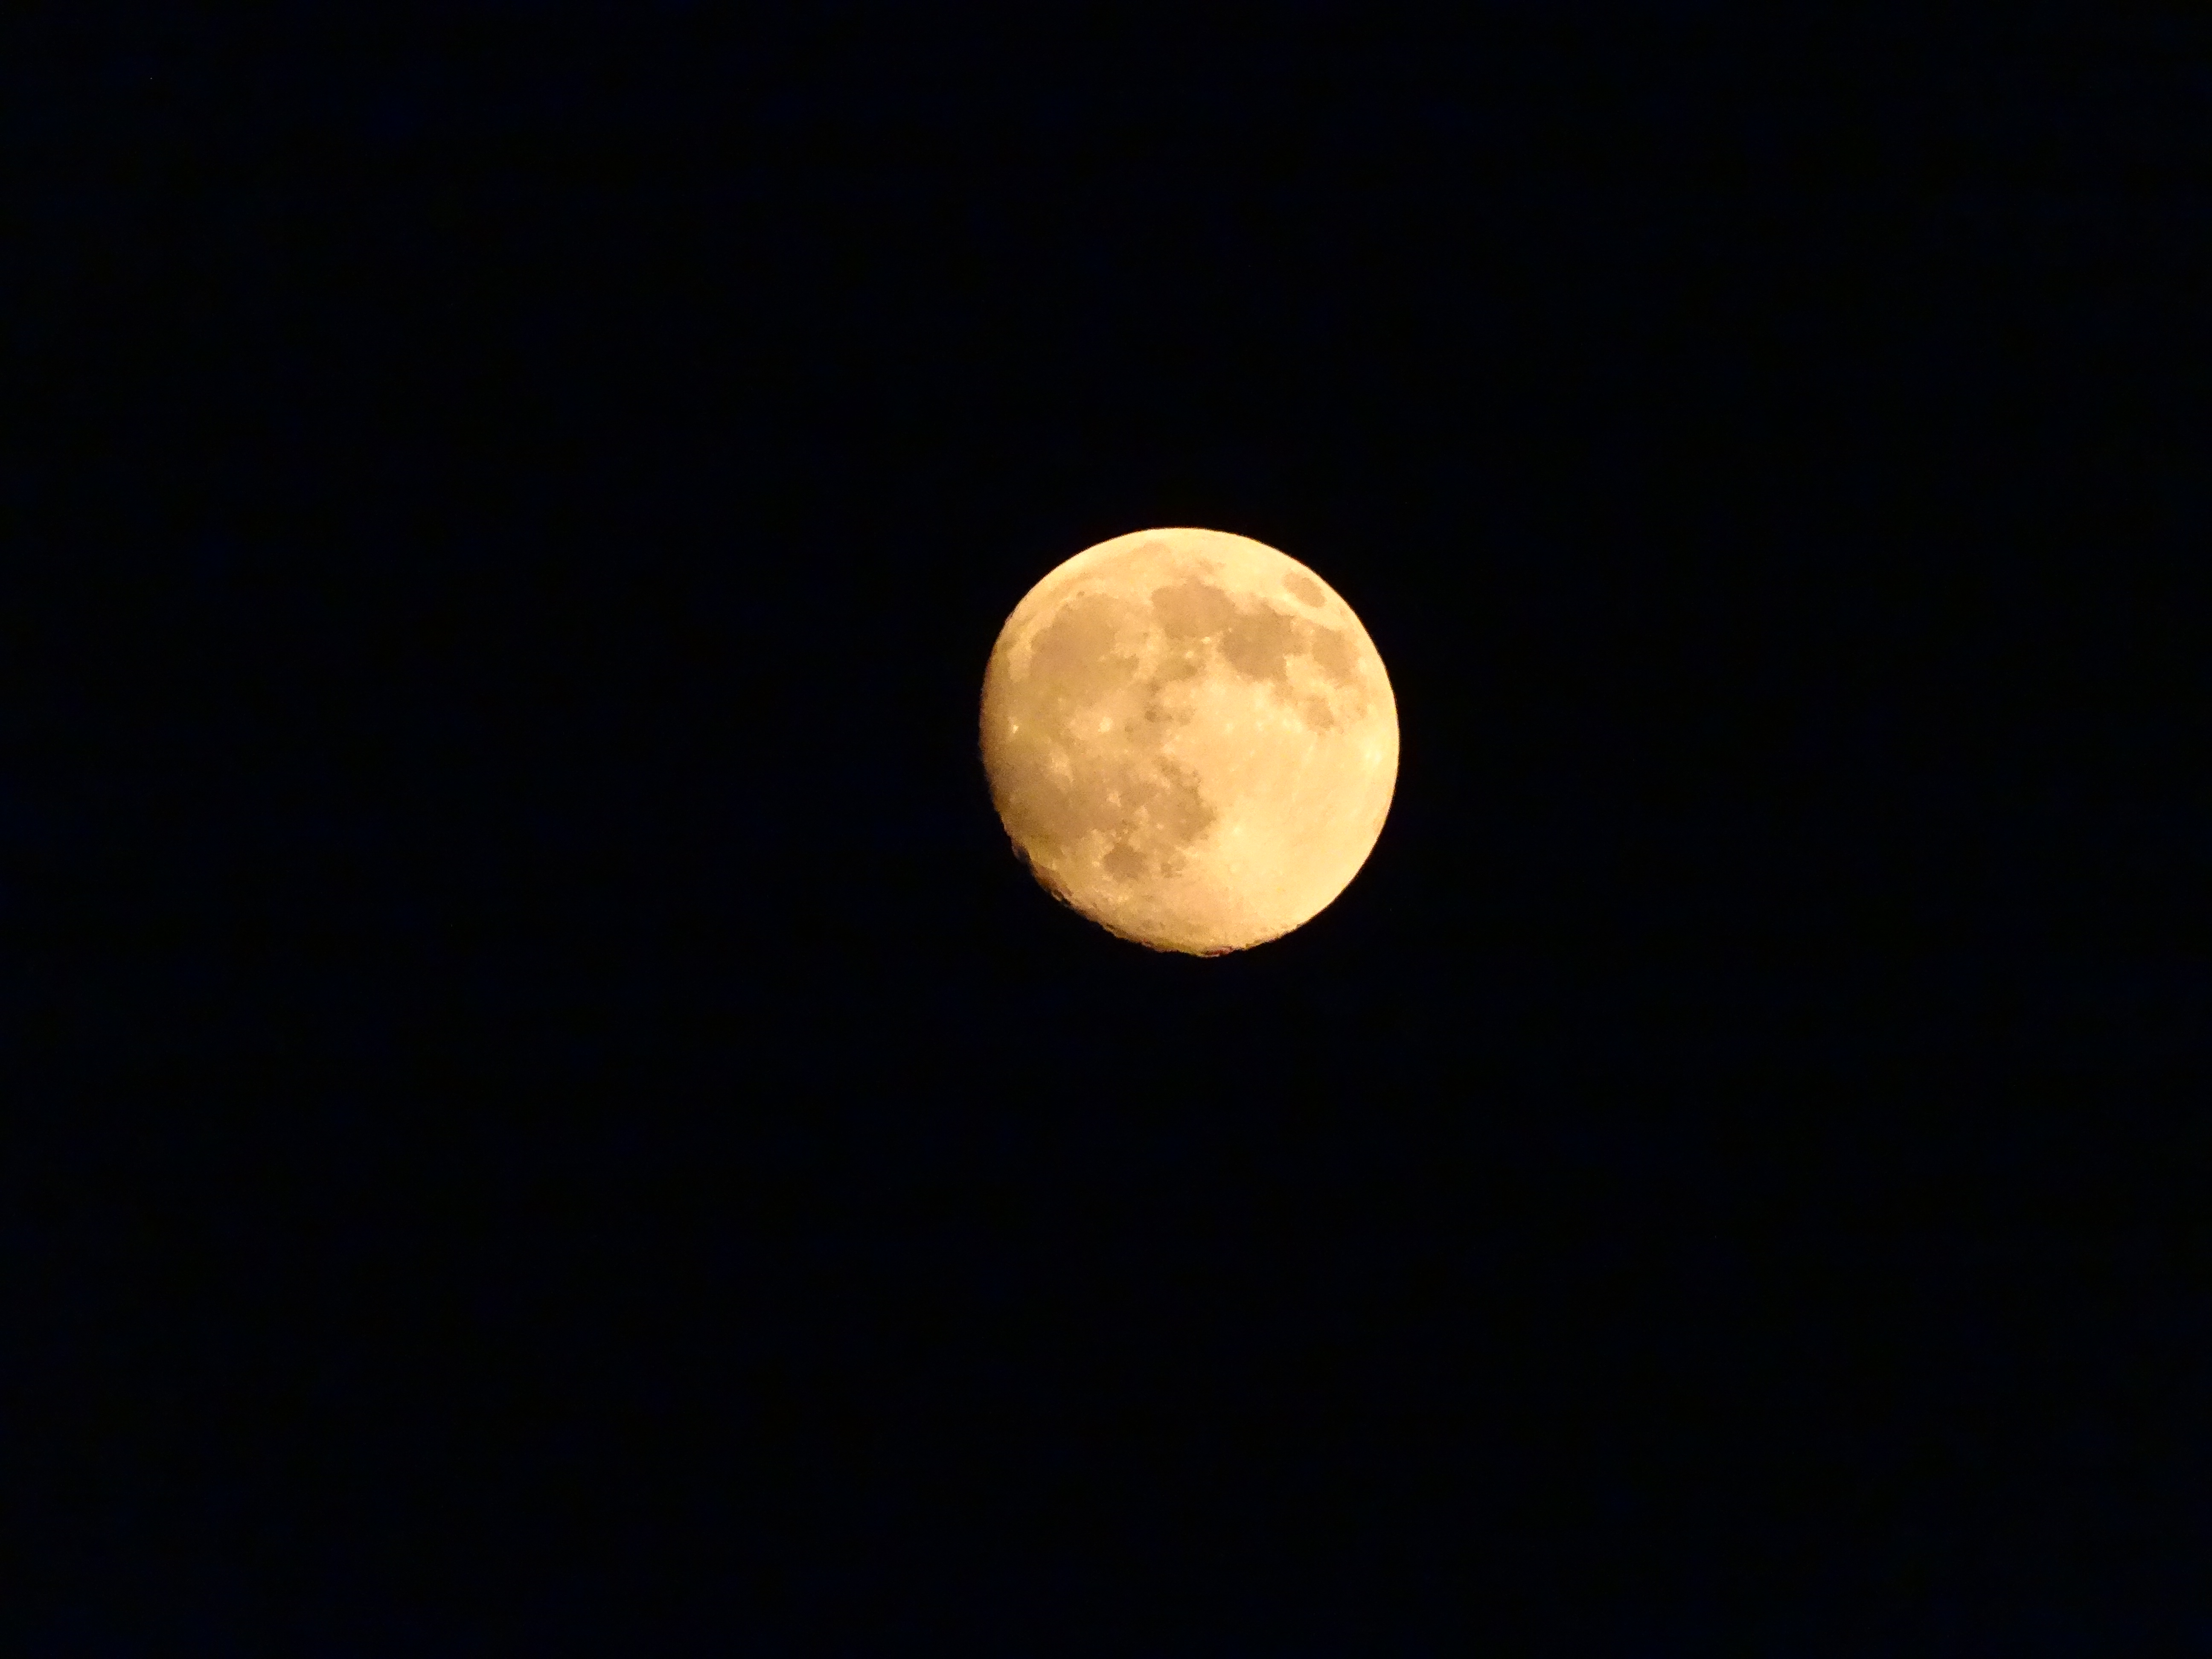 20150629-moon-picture-lunar-photo-taken-at-60x-power-with-sony-dsc-hx50v-by-greg-johnson-image-dsc07670-5184x3888